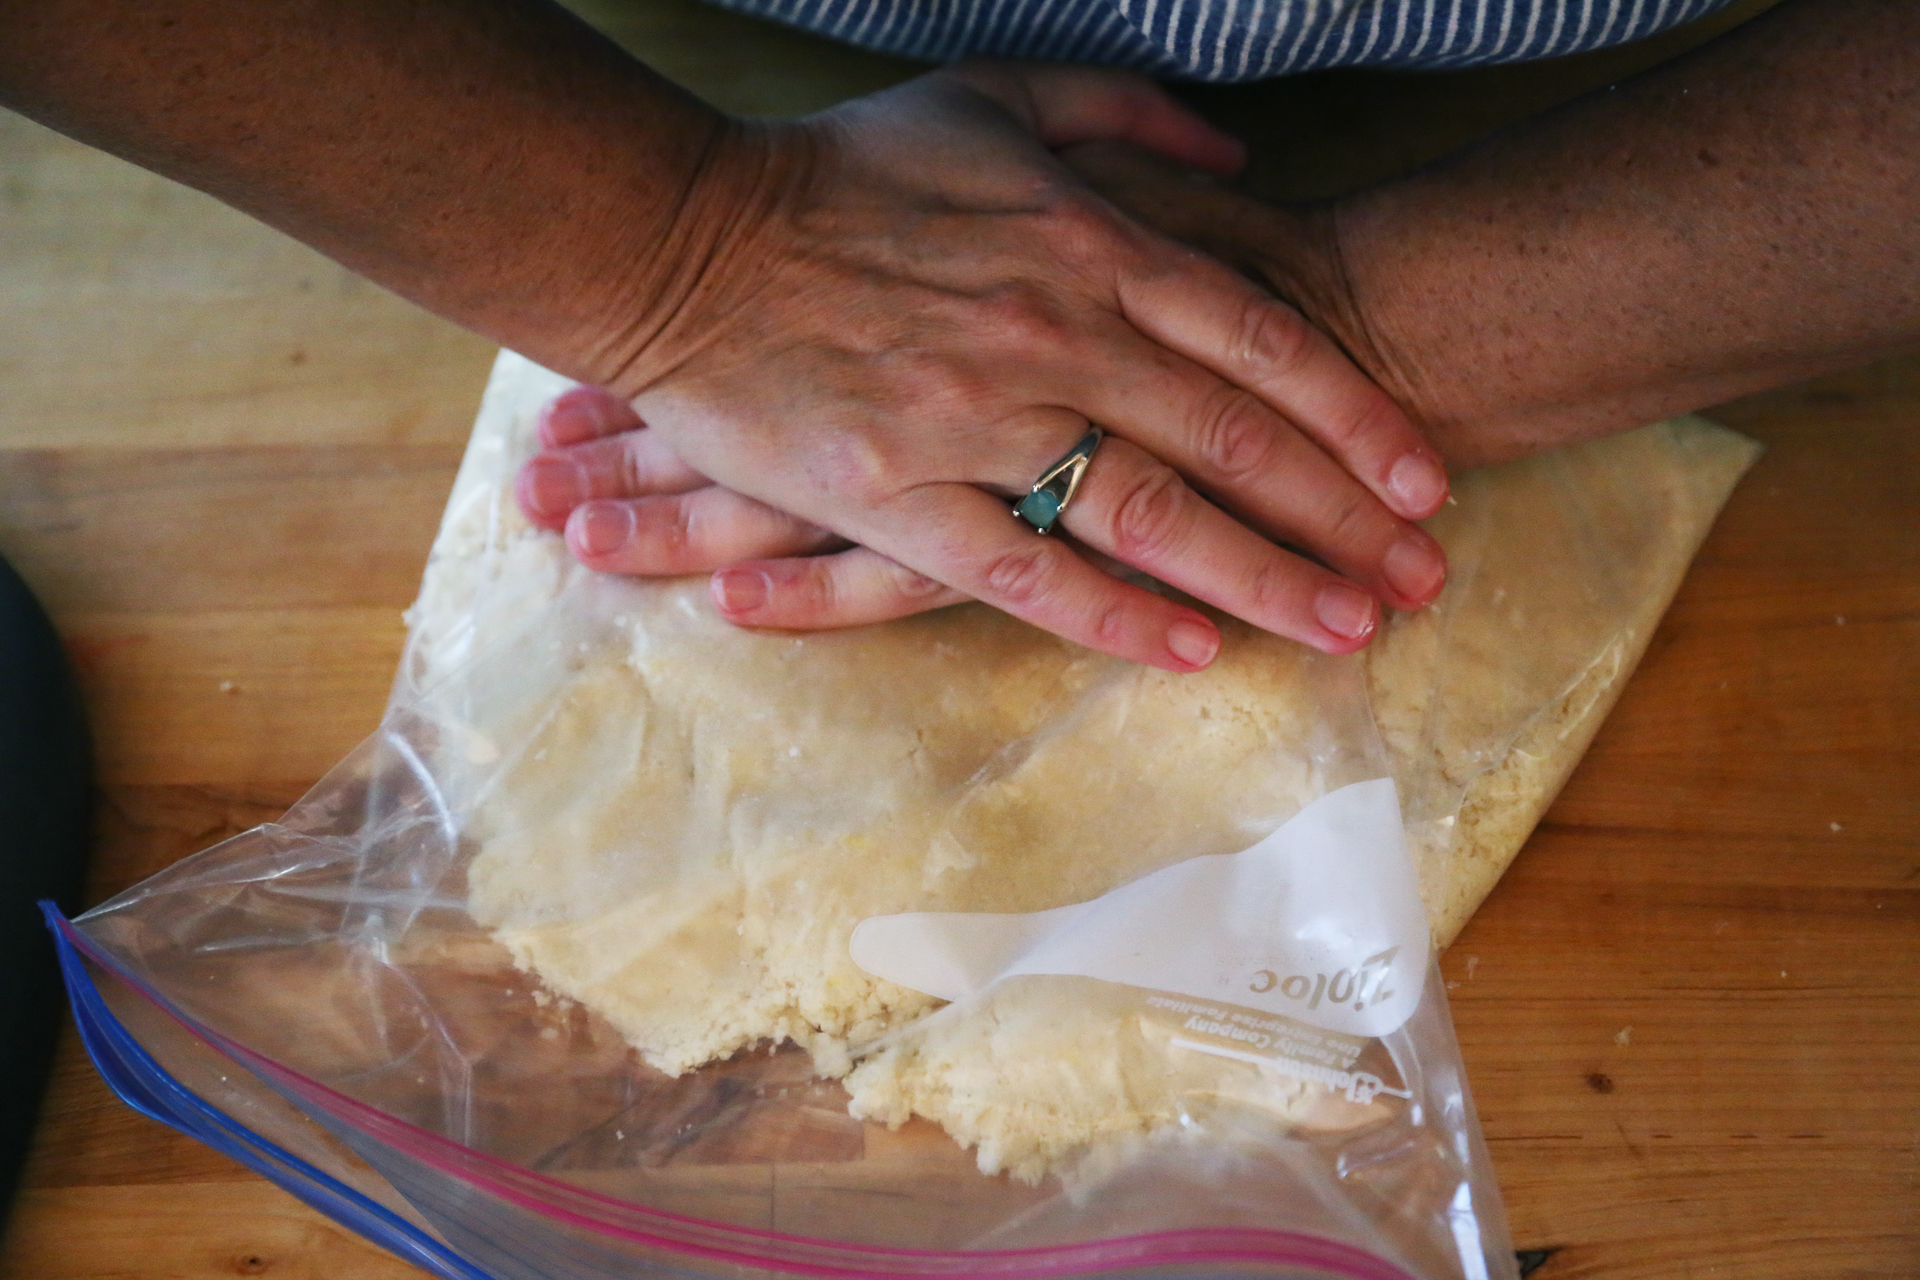 Transfer the dough to a large zippered plastic bag and press it together into a disk. Refrigerate for 30 minutes.